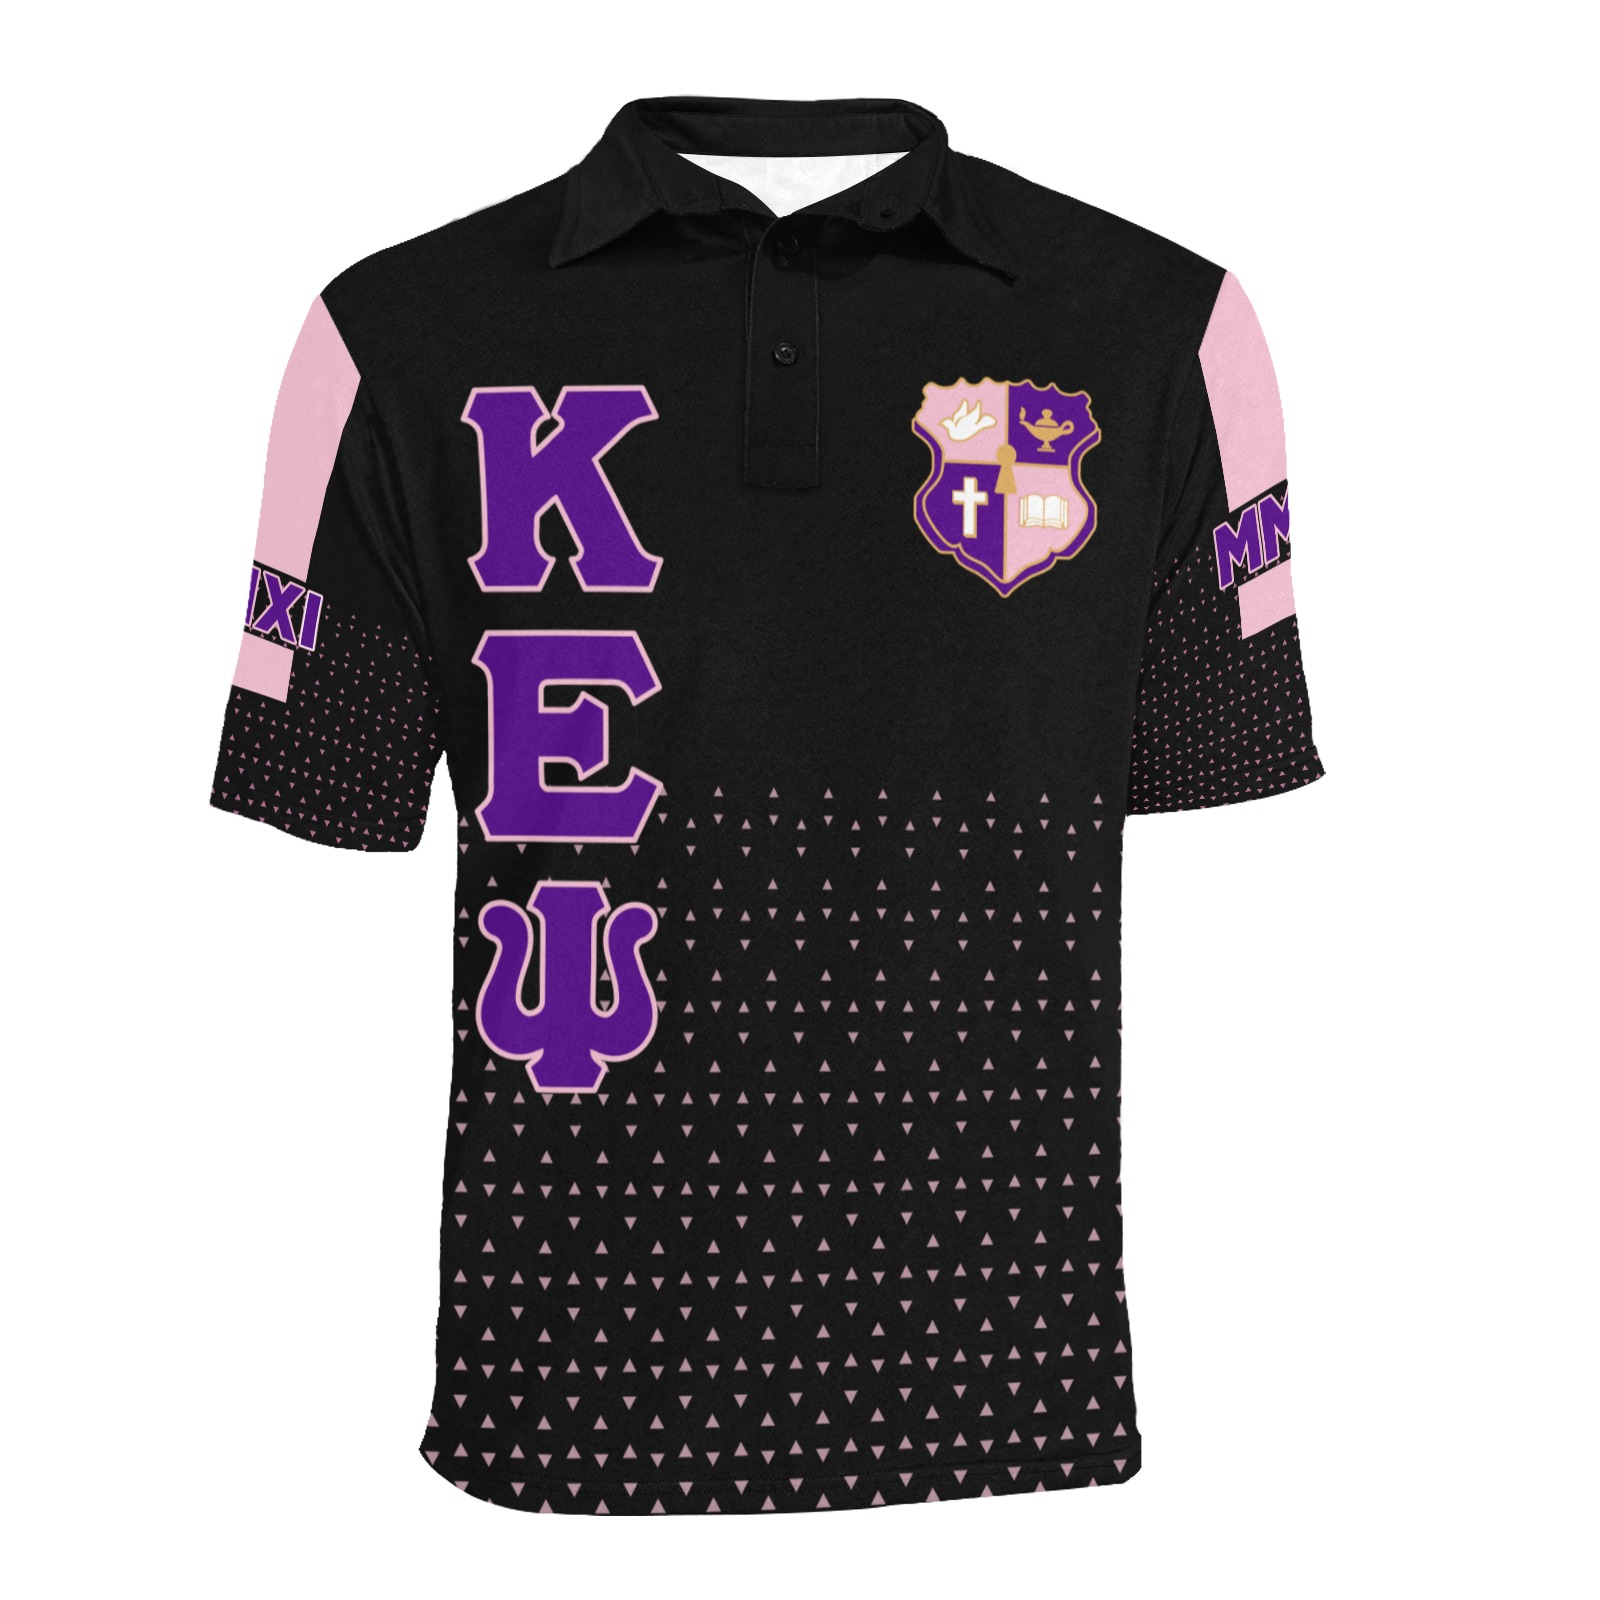 Black and purple Greek-lettered polo shirt design.